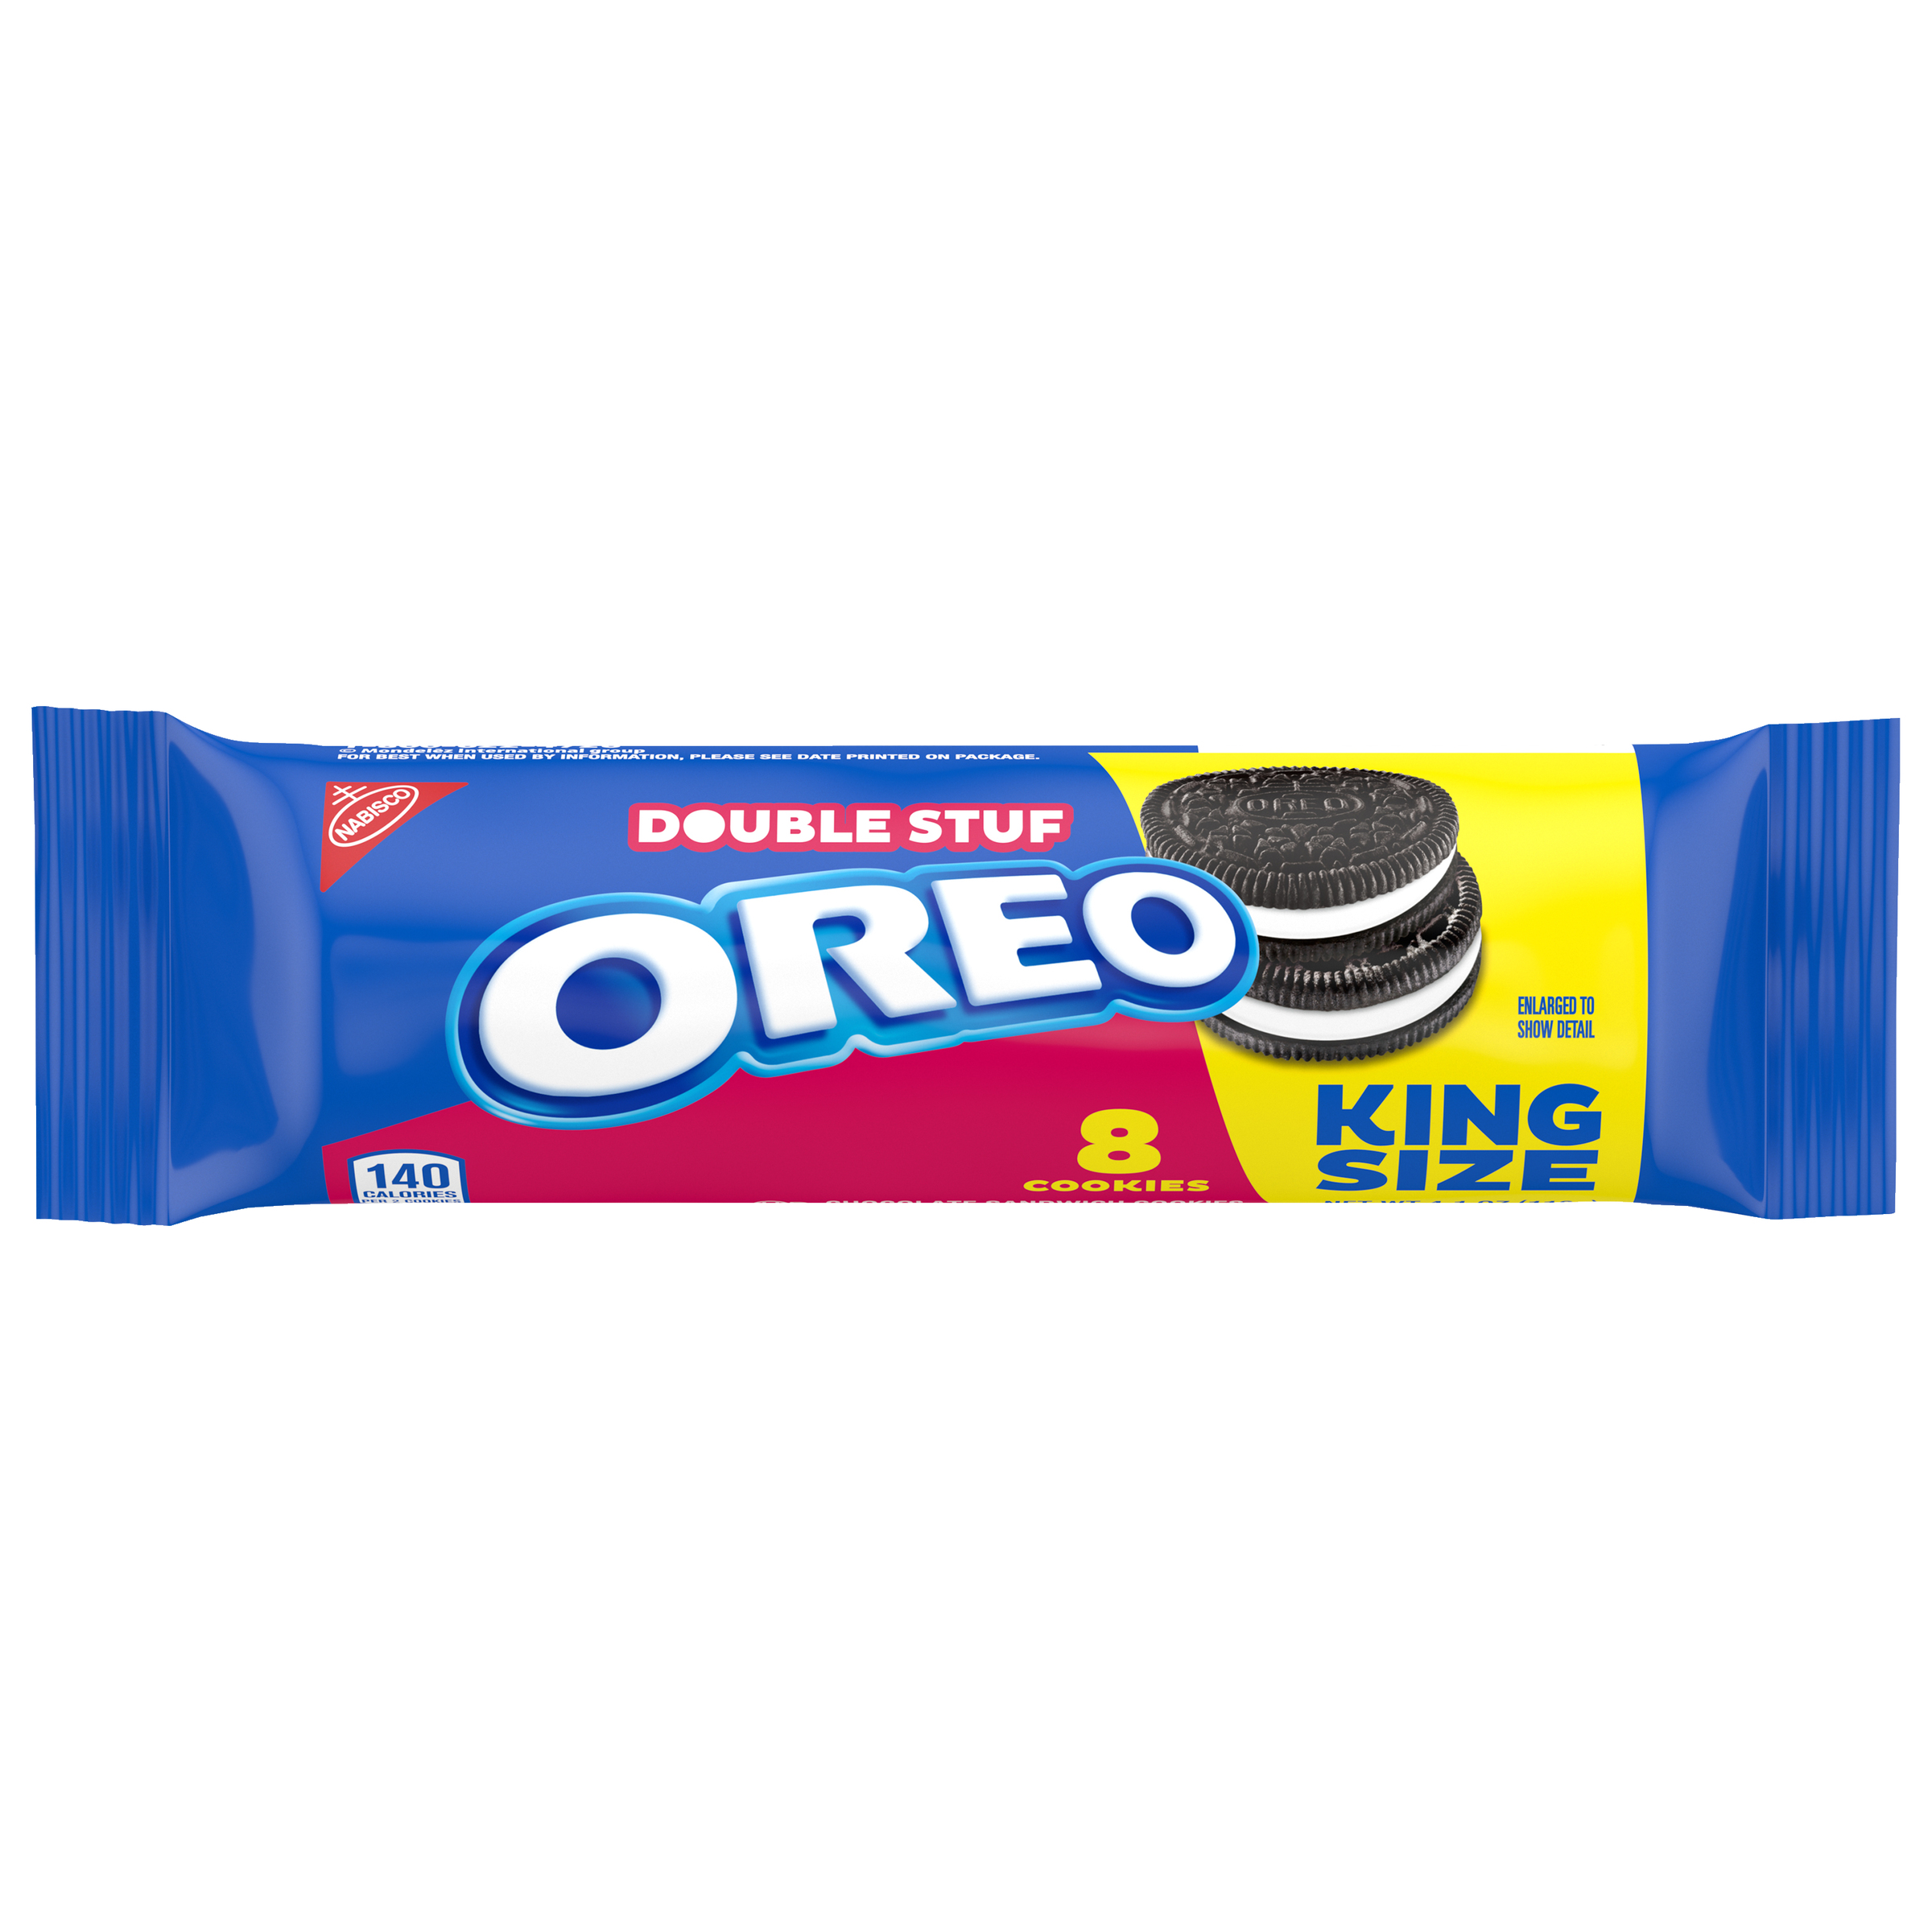 OREO Double Stuf Chocolate Sandwich Cookies, King Size Snack Pack, 4.1 oz-0